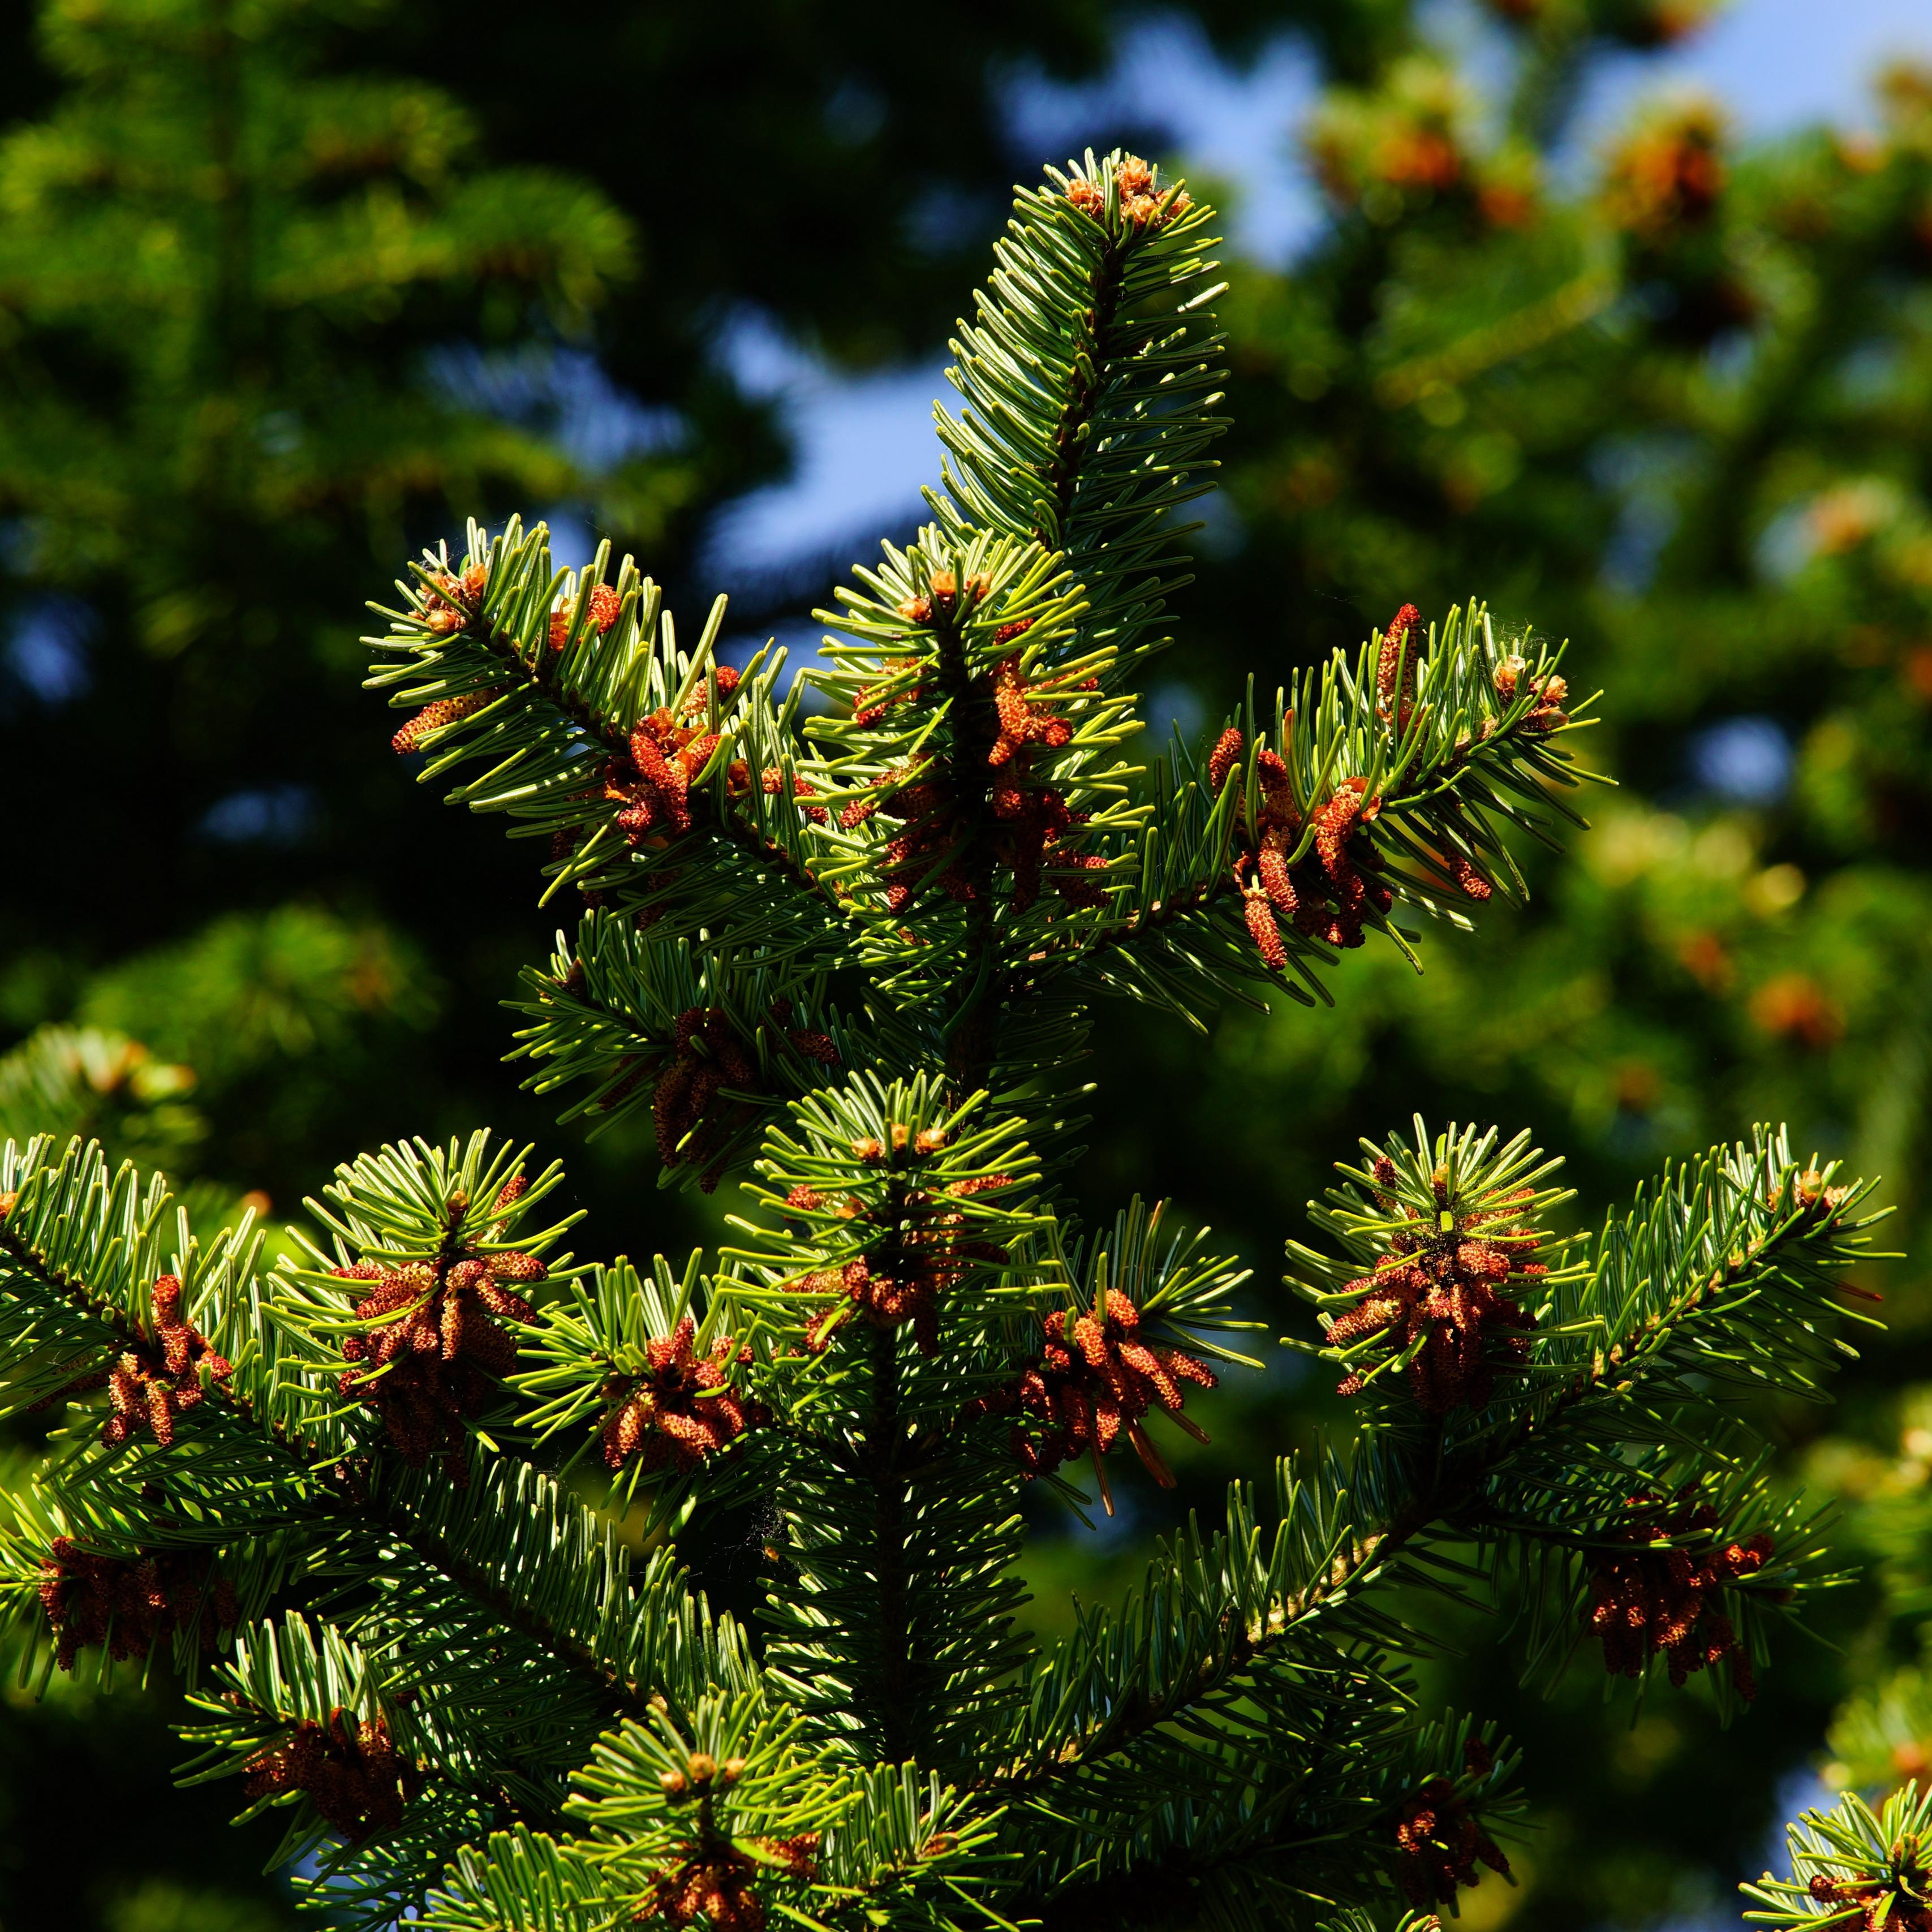 Download wallpaper 3415x3415 pine, pine needles, branches, thorns